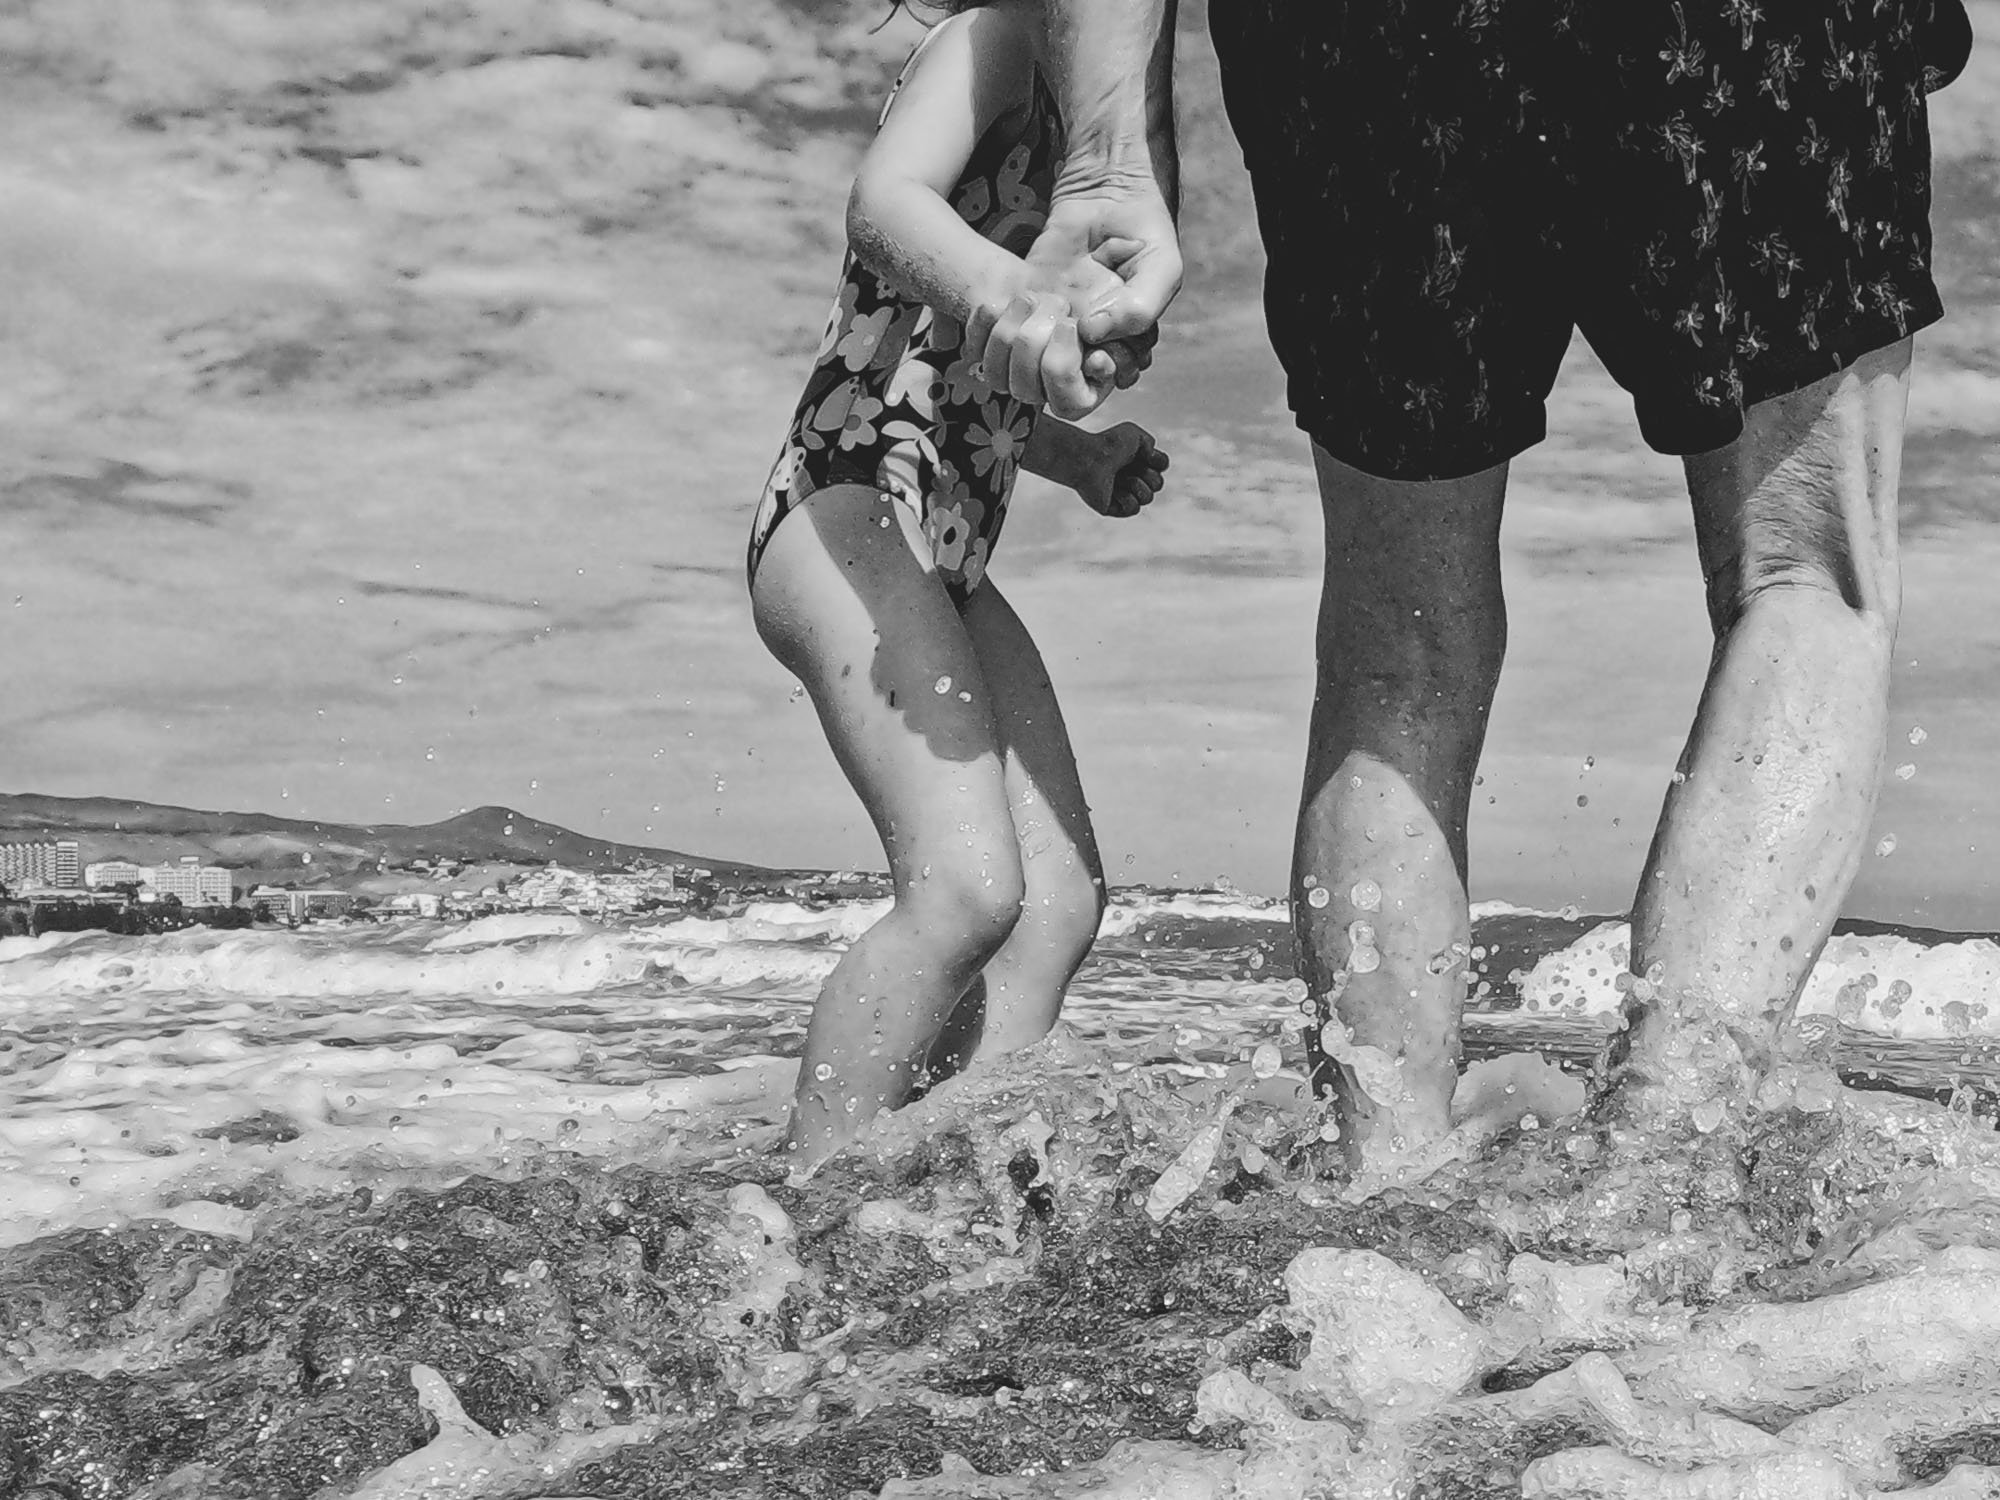 family-photo-shoot-beach-natural-unposed-grandfather-granddaughter-holding-hands-in-sea-black-and-white-art-photographer.jpg